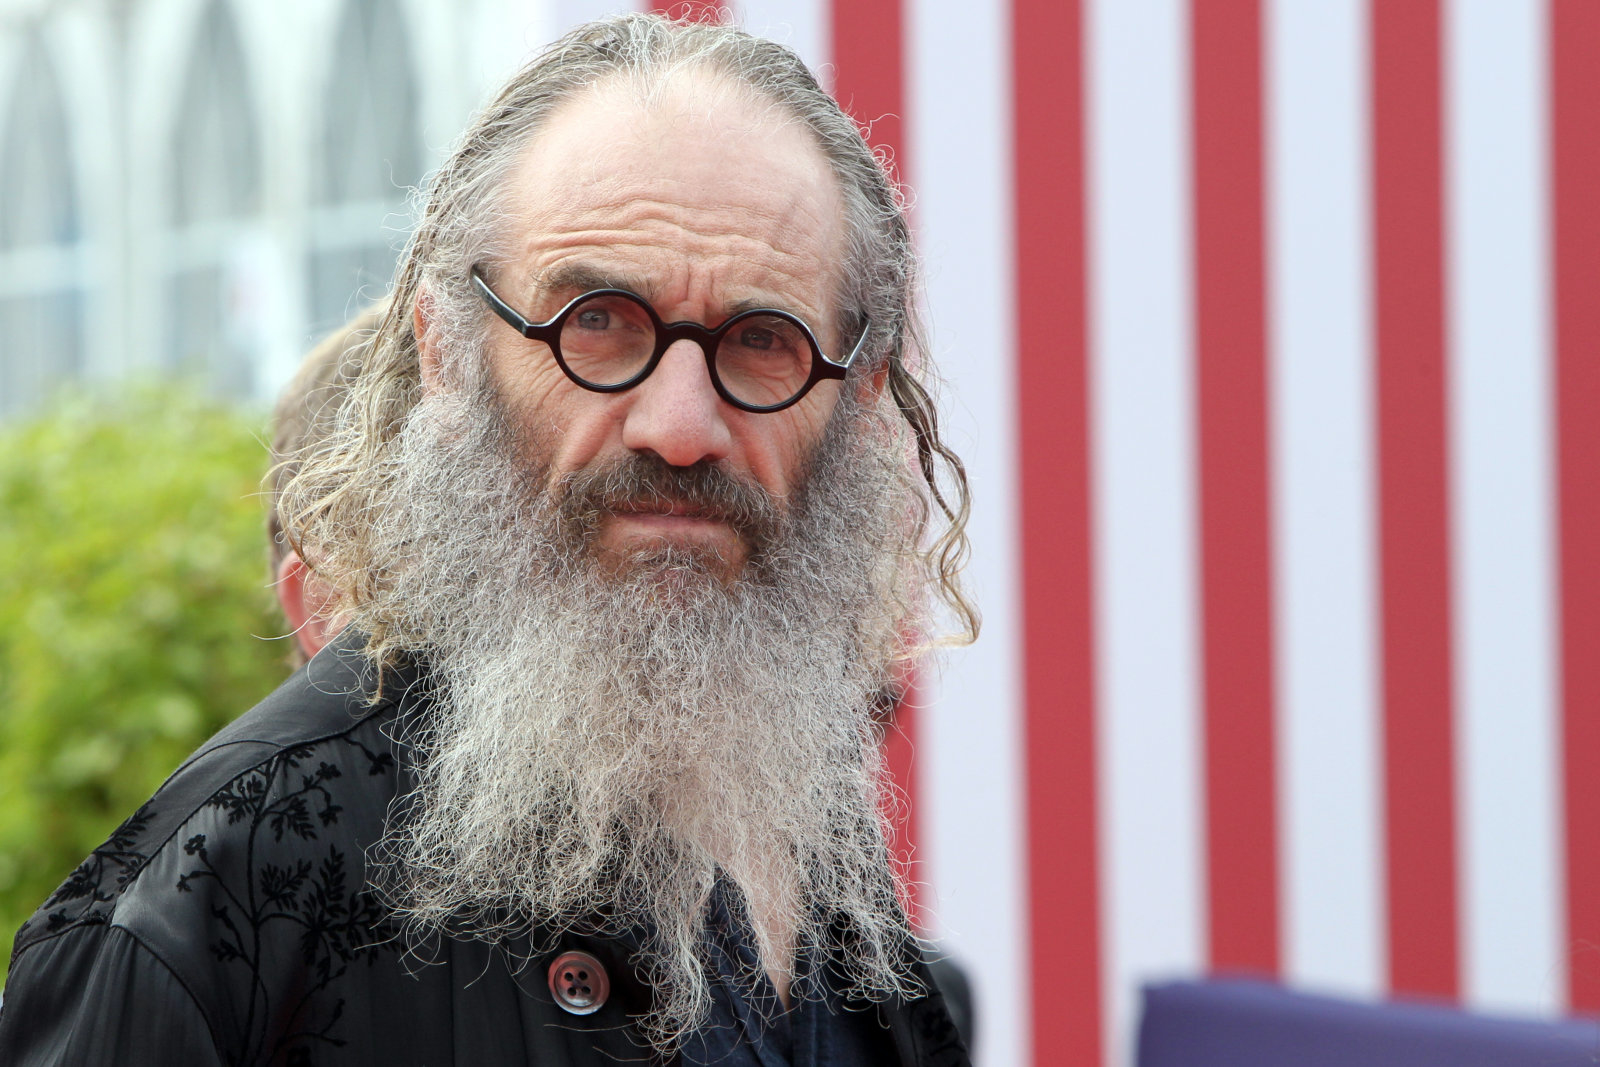 British director, Tony Kaye arrives for the screening of his latest movie "Detachment", during the 37th American Film Festival, in Deauville, northwestern France, on September 9, 2011. The event runs until September 11.   AFP PHOTO / KENZO TRIBOUILLARD (Photo credit should read KENZO TRIBOUILLARD/AFP/Getty Images)